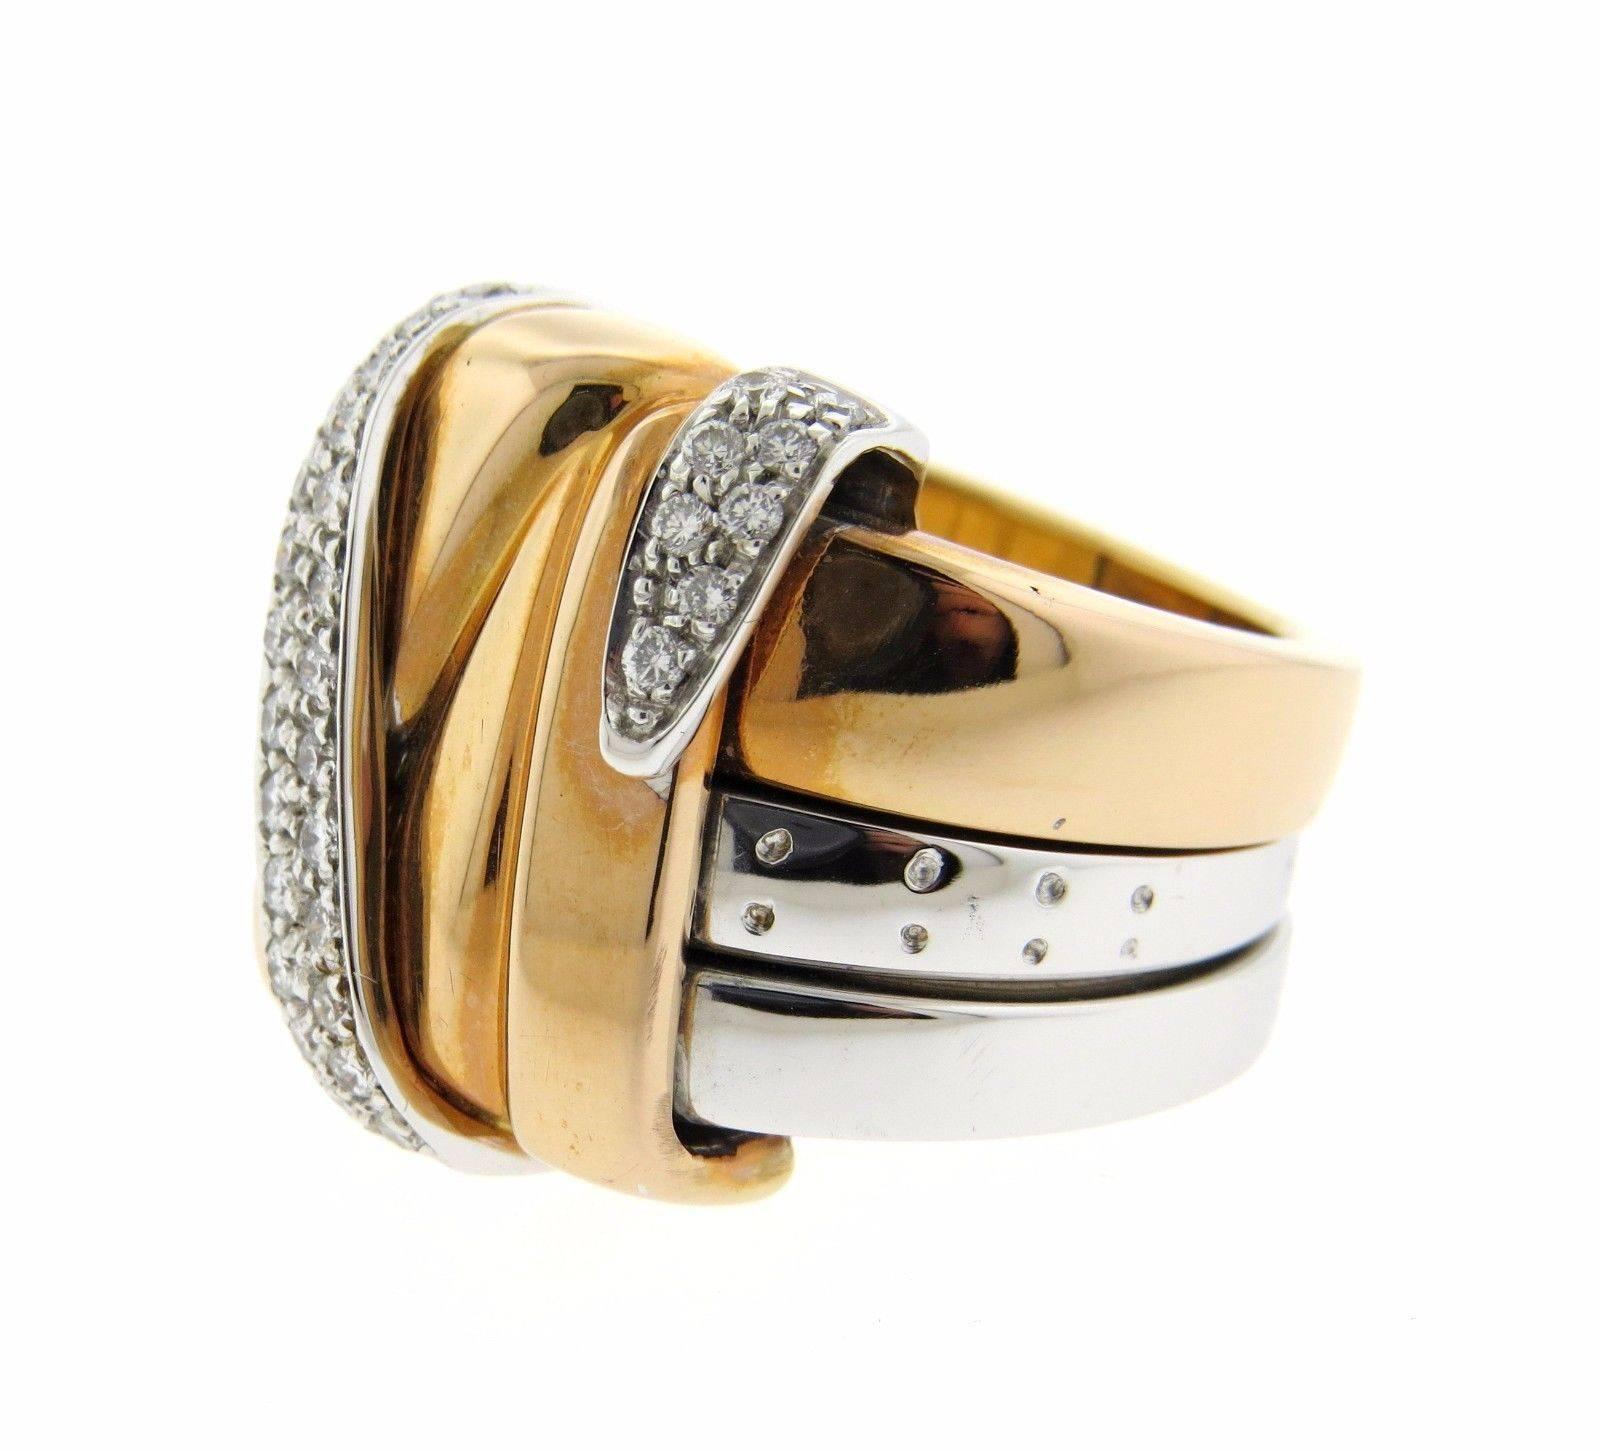 An 18k white and yellow gold ring set with approximately 0.26ctw of H/VS diamonds.  The ring is a size 6 3/4 and is 19.3mm at the widest point.  The weight of the piece is 26.7 grams.